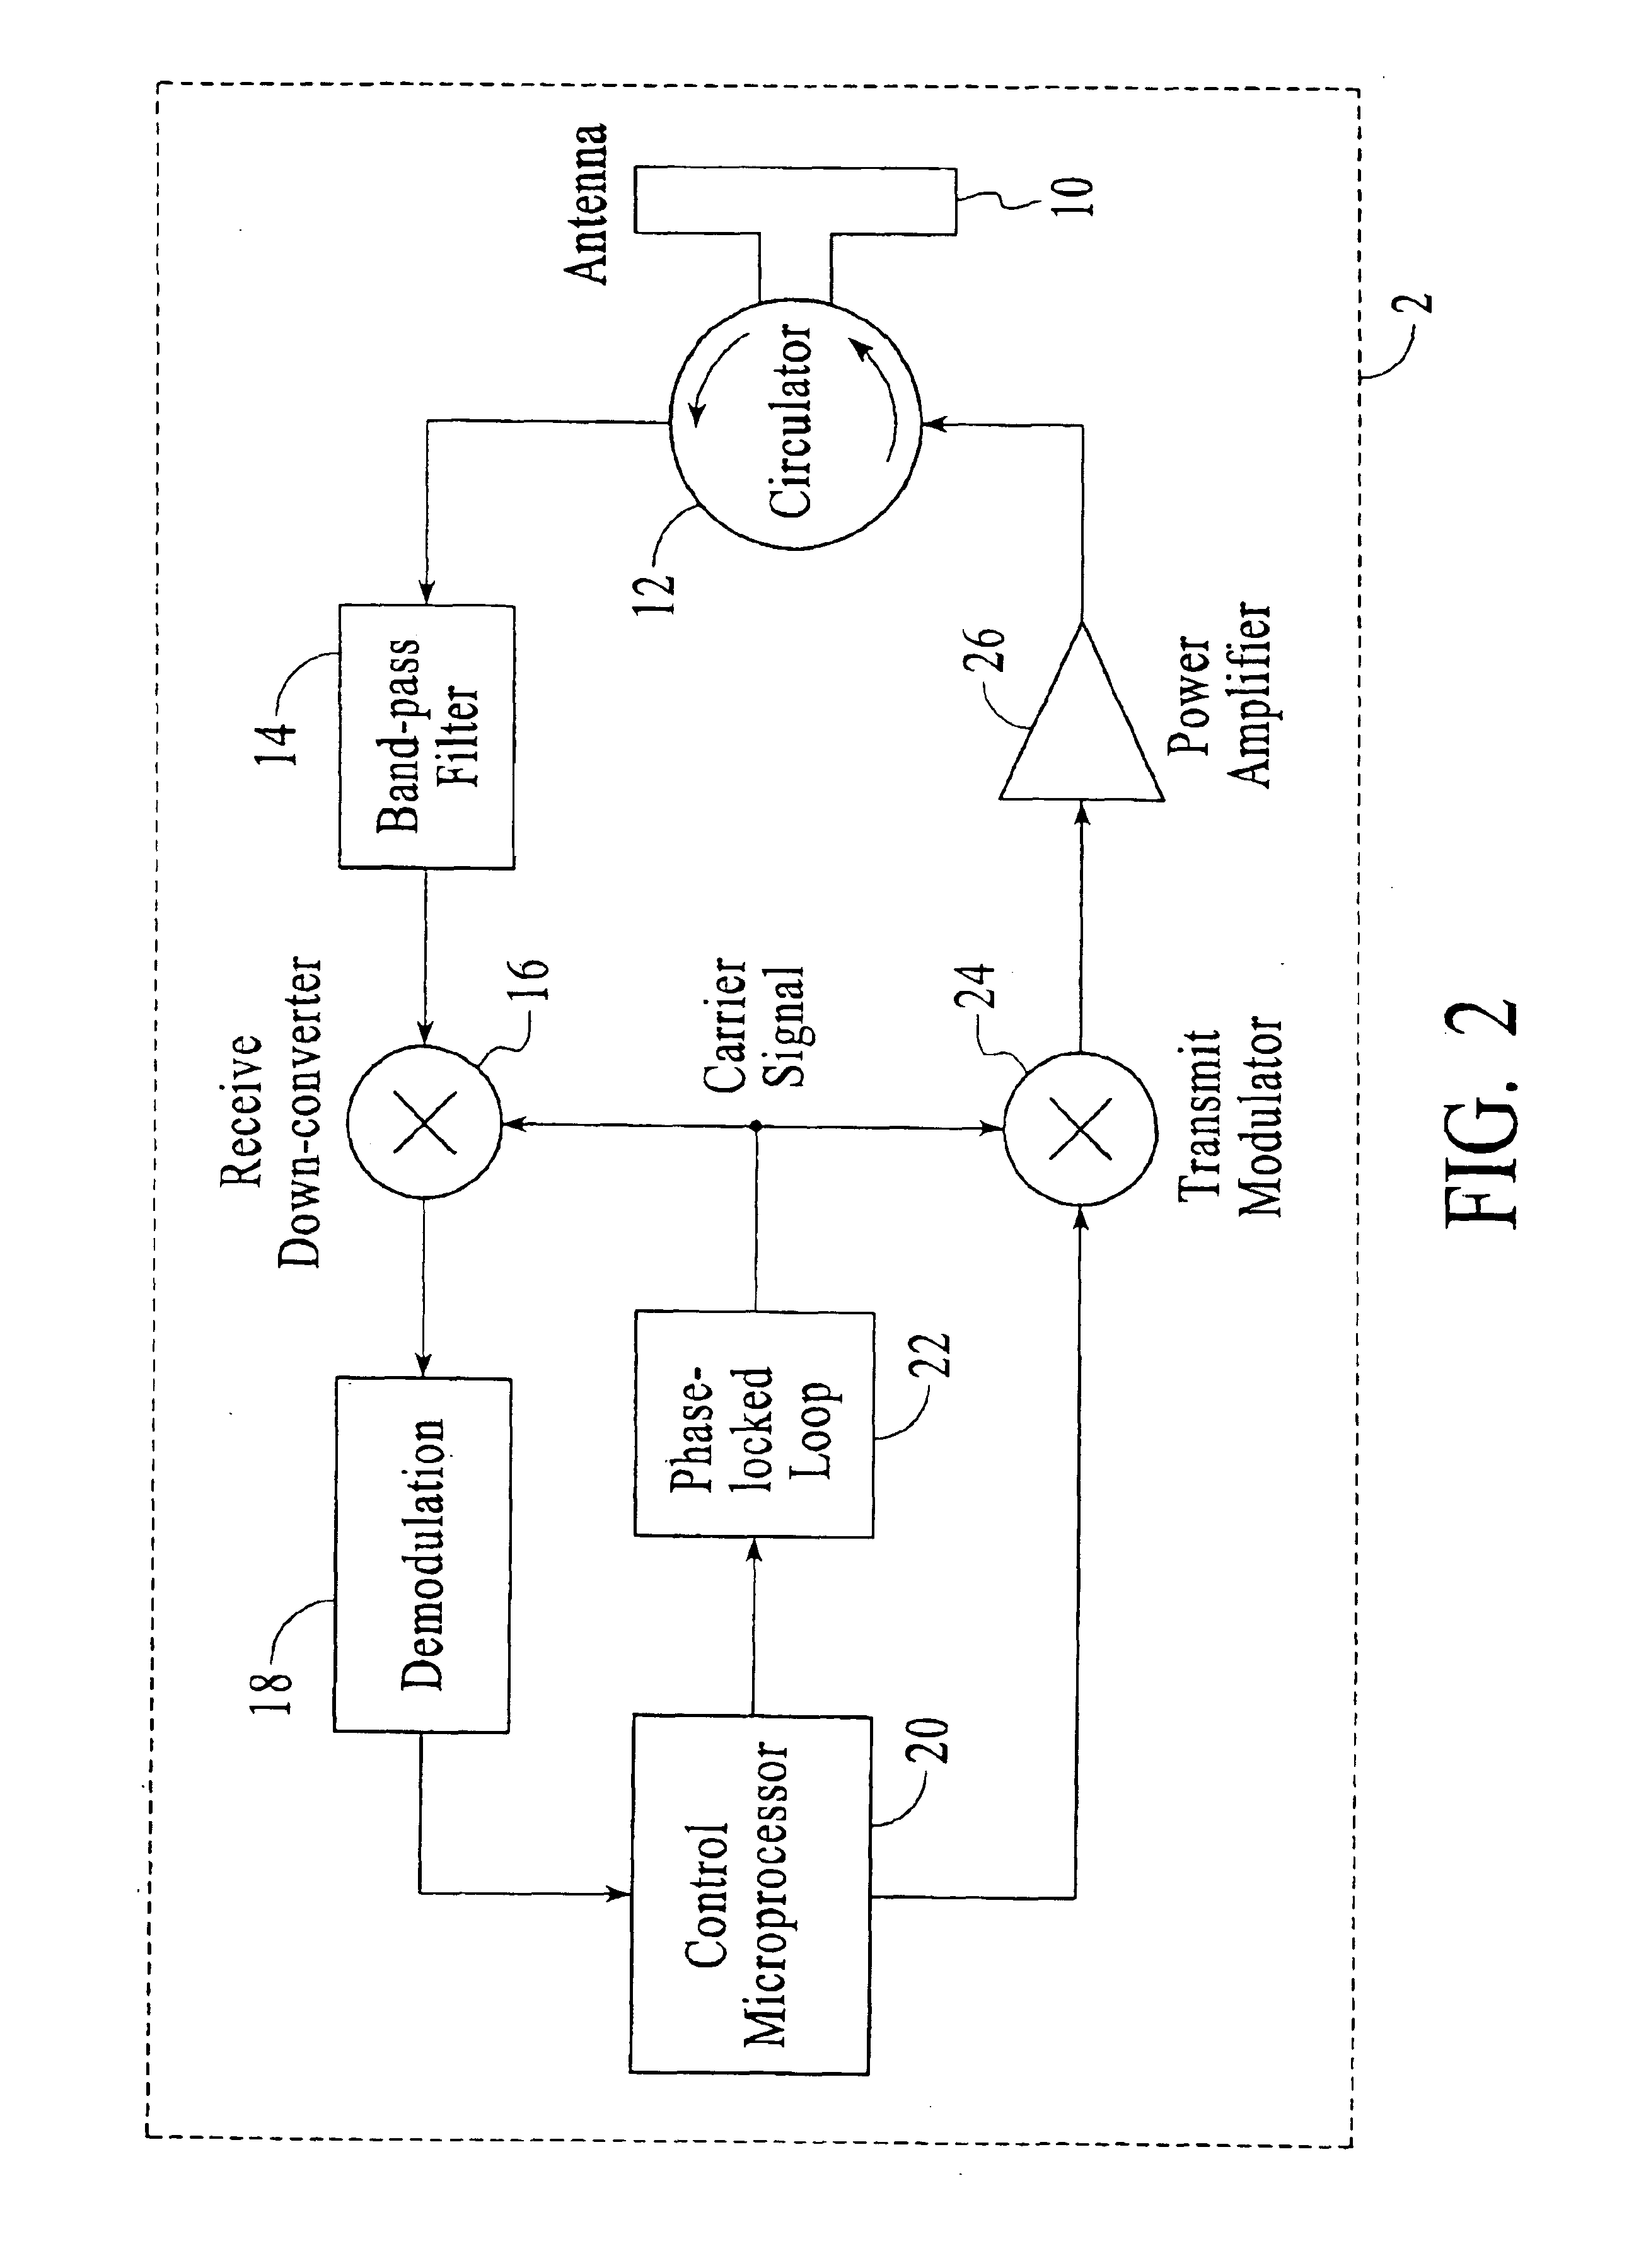 Method and apparatus for efficiently querying and identifying multiple items on a communication channel